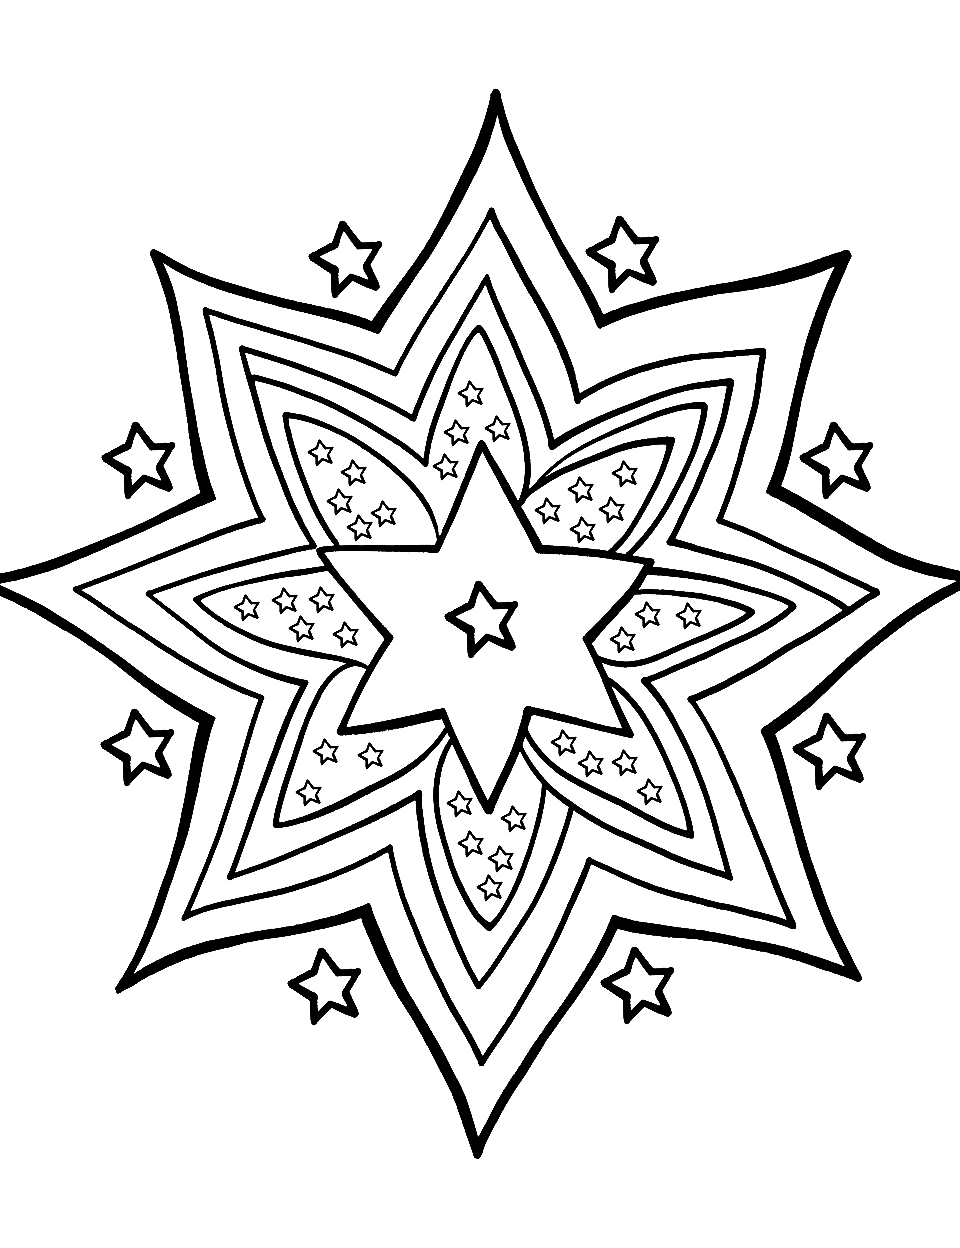 Mandala Star Design Coloring Page - A large, intricate mandala design made up entirely of stars and celestial patterns.